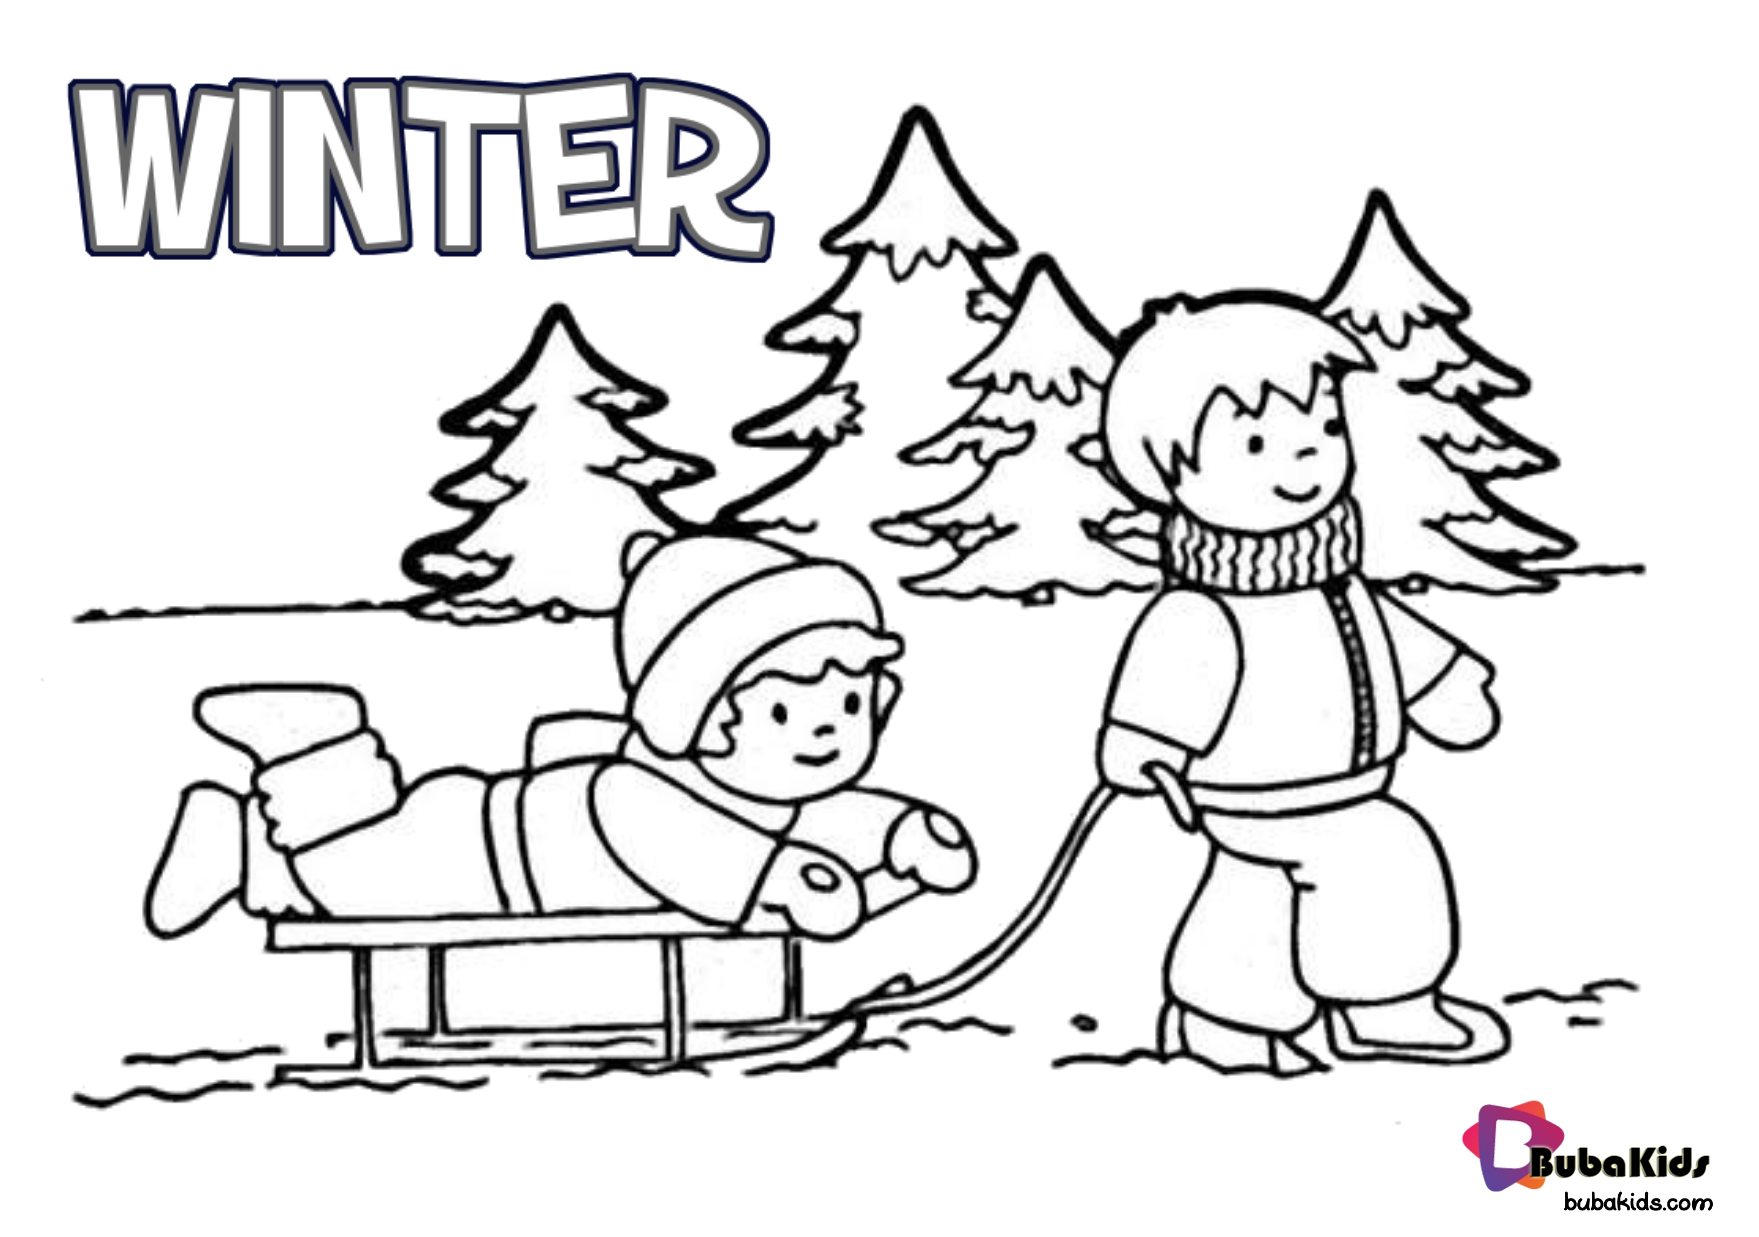 Free printable Winter coloring page.